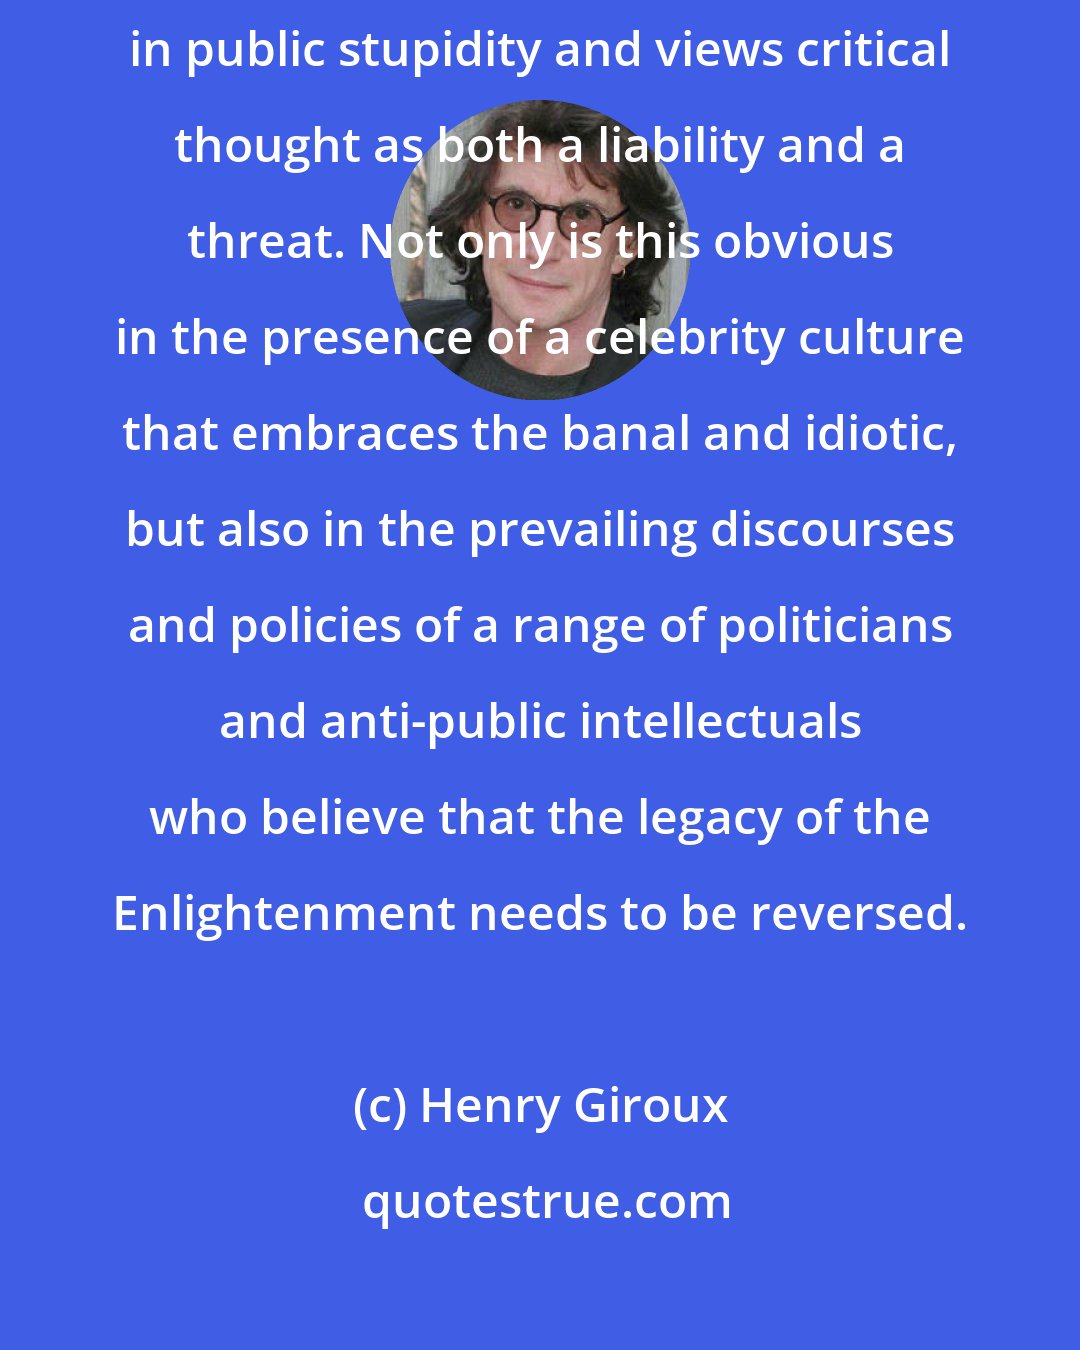 Henry Giroux: The United States has degenerated into a social order that is awash in public stupidity and views critical thought as both a liability and a threat. Not only is this obvious in the presence of a celebrity culture that embraces the banal and idiotic, but also in the prevailing discourses and policies of a range of politicians and anti-public intellectuals who believe that the legacy of the Enlightenment needs to be reversed.